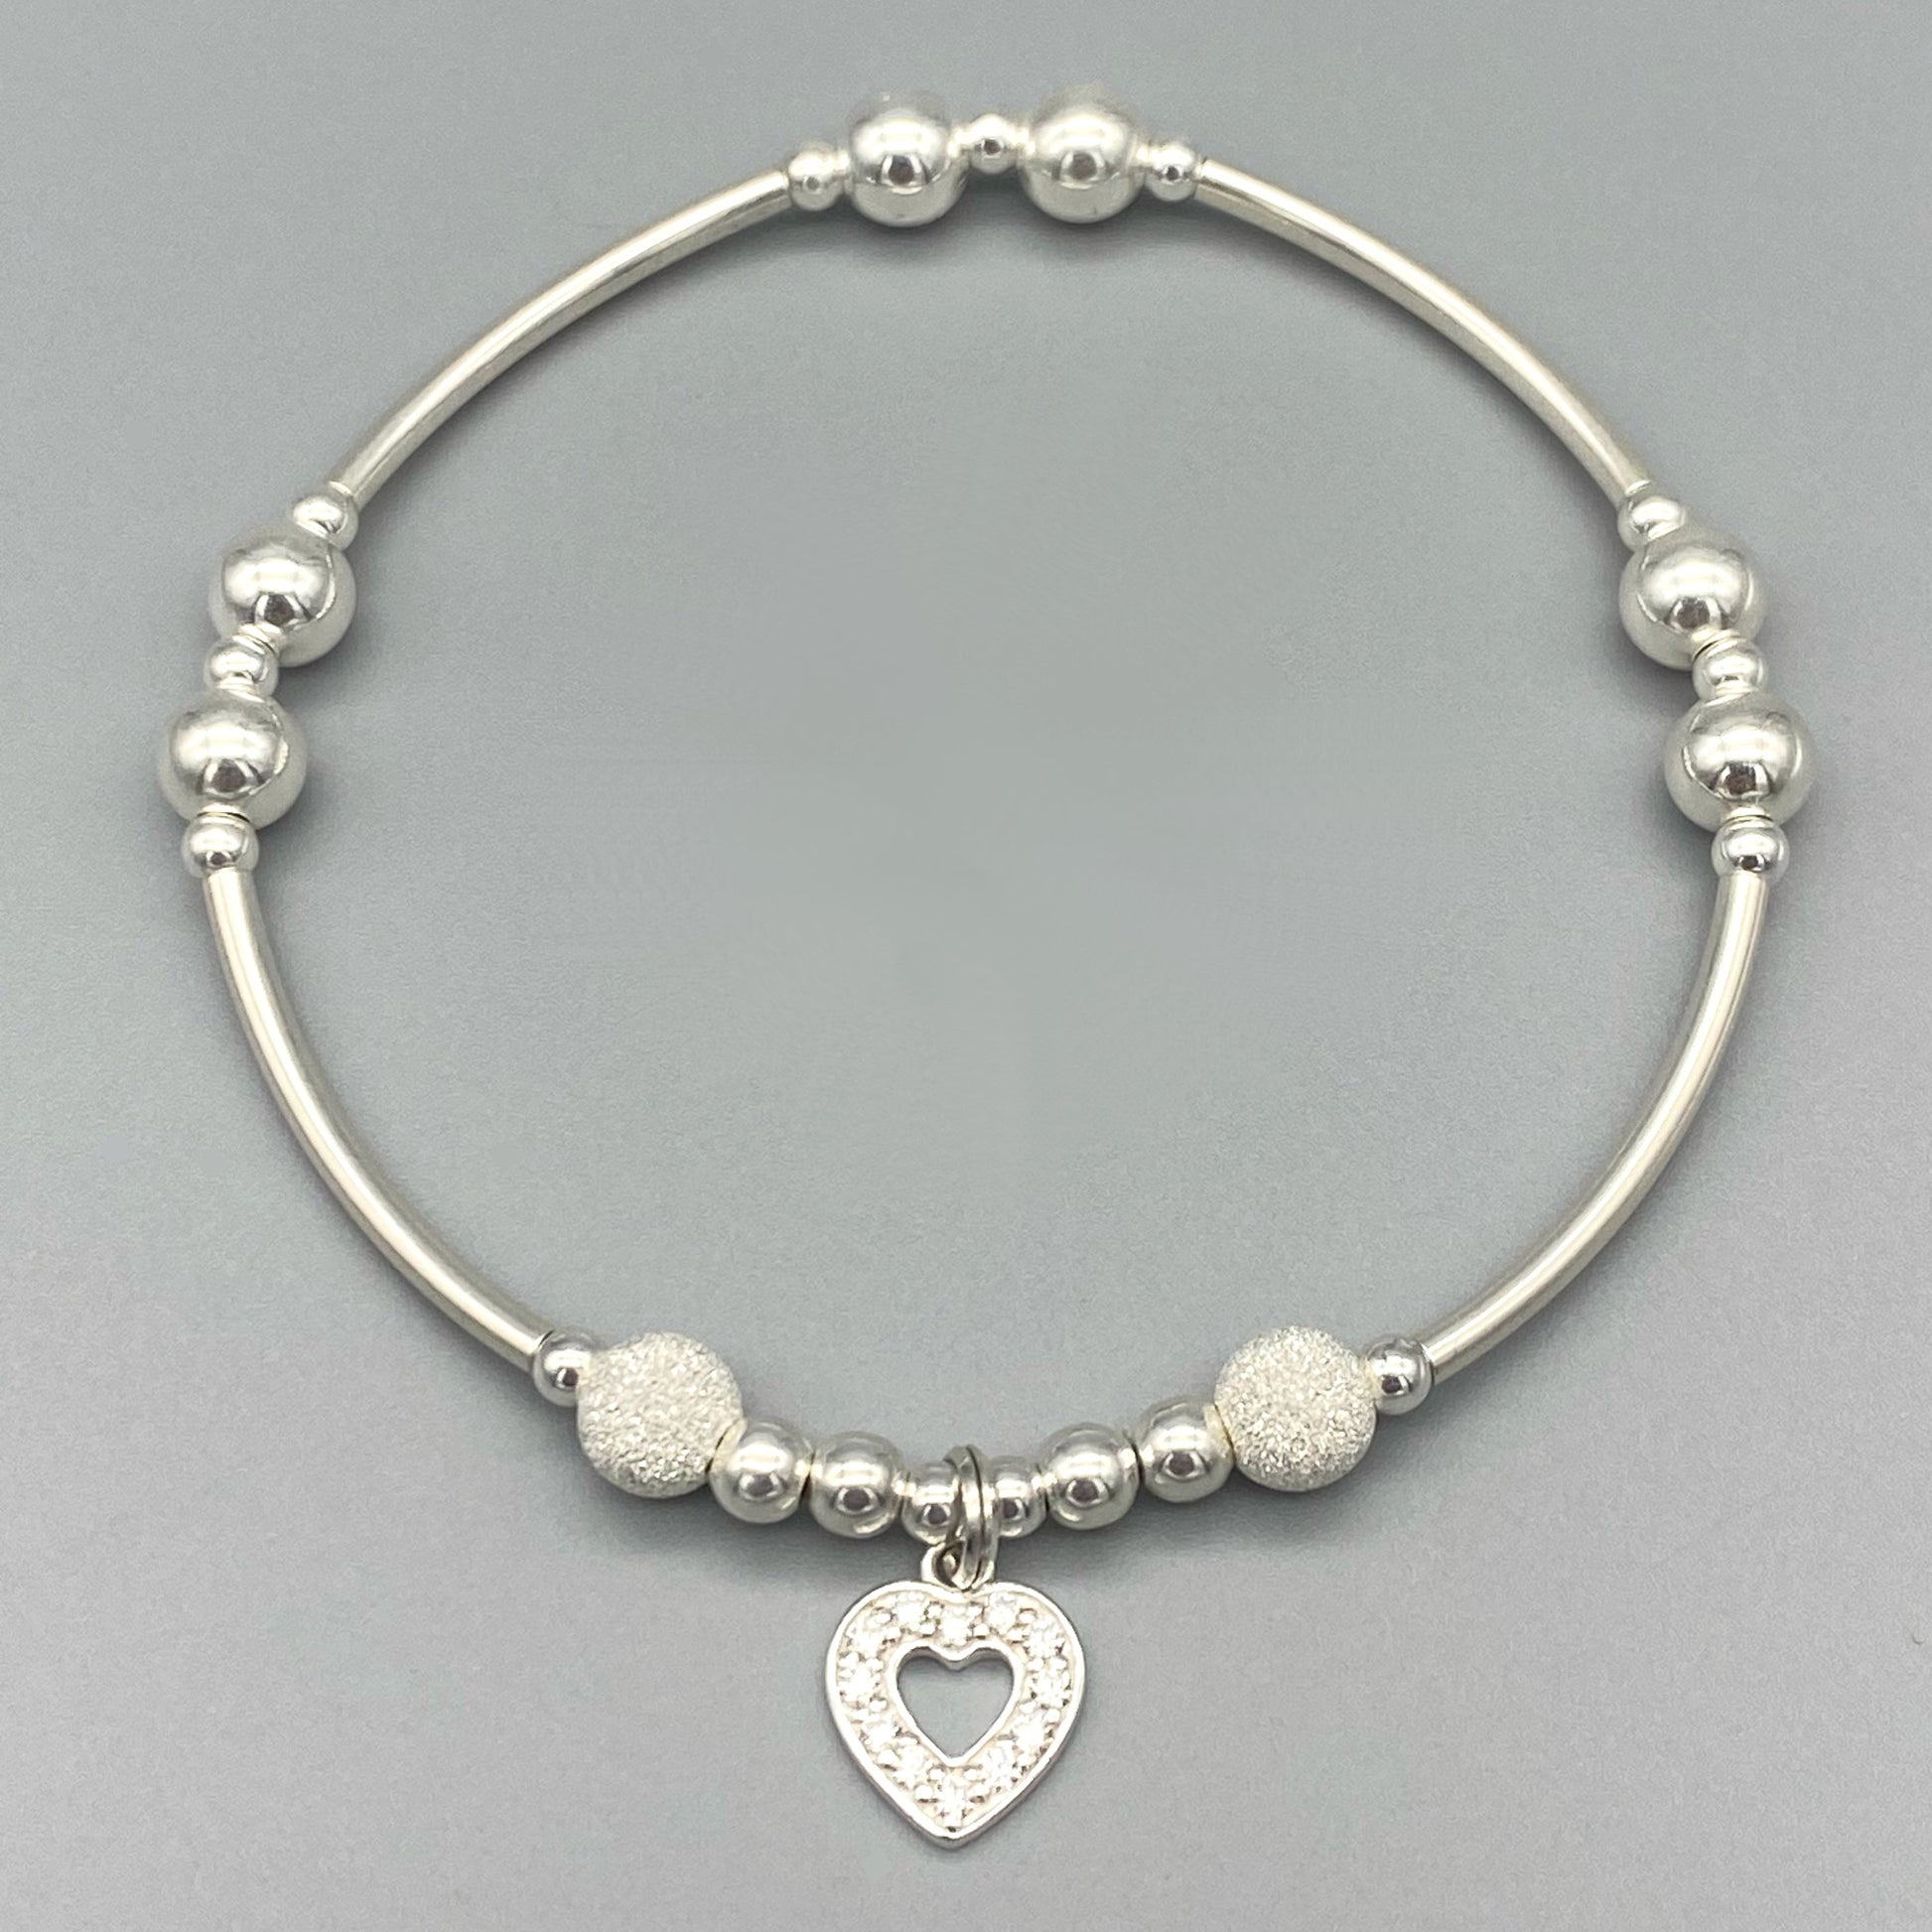 Crystal heart sterling silver stacking charm bracelet by My Silver Wish